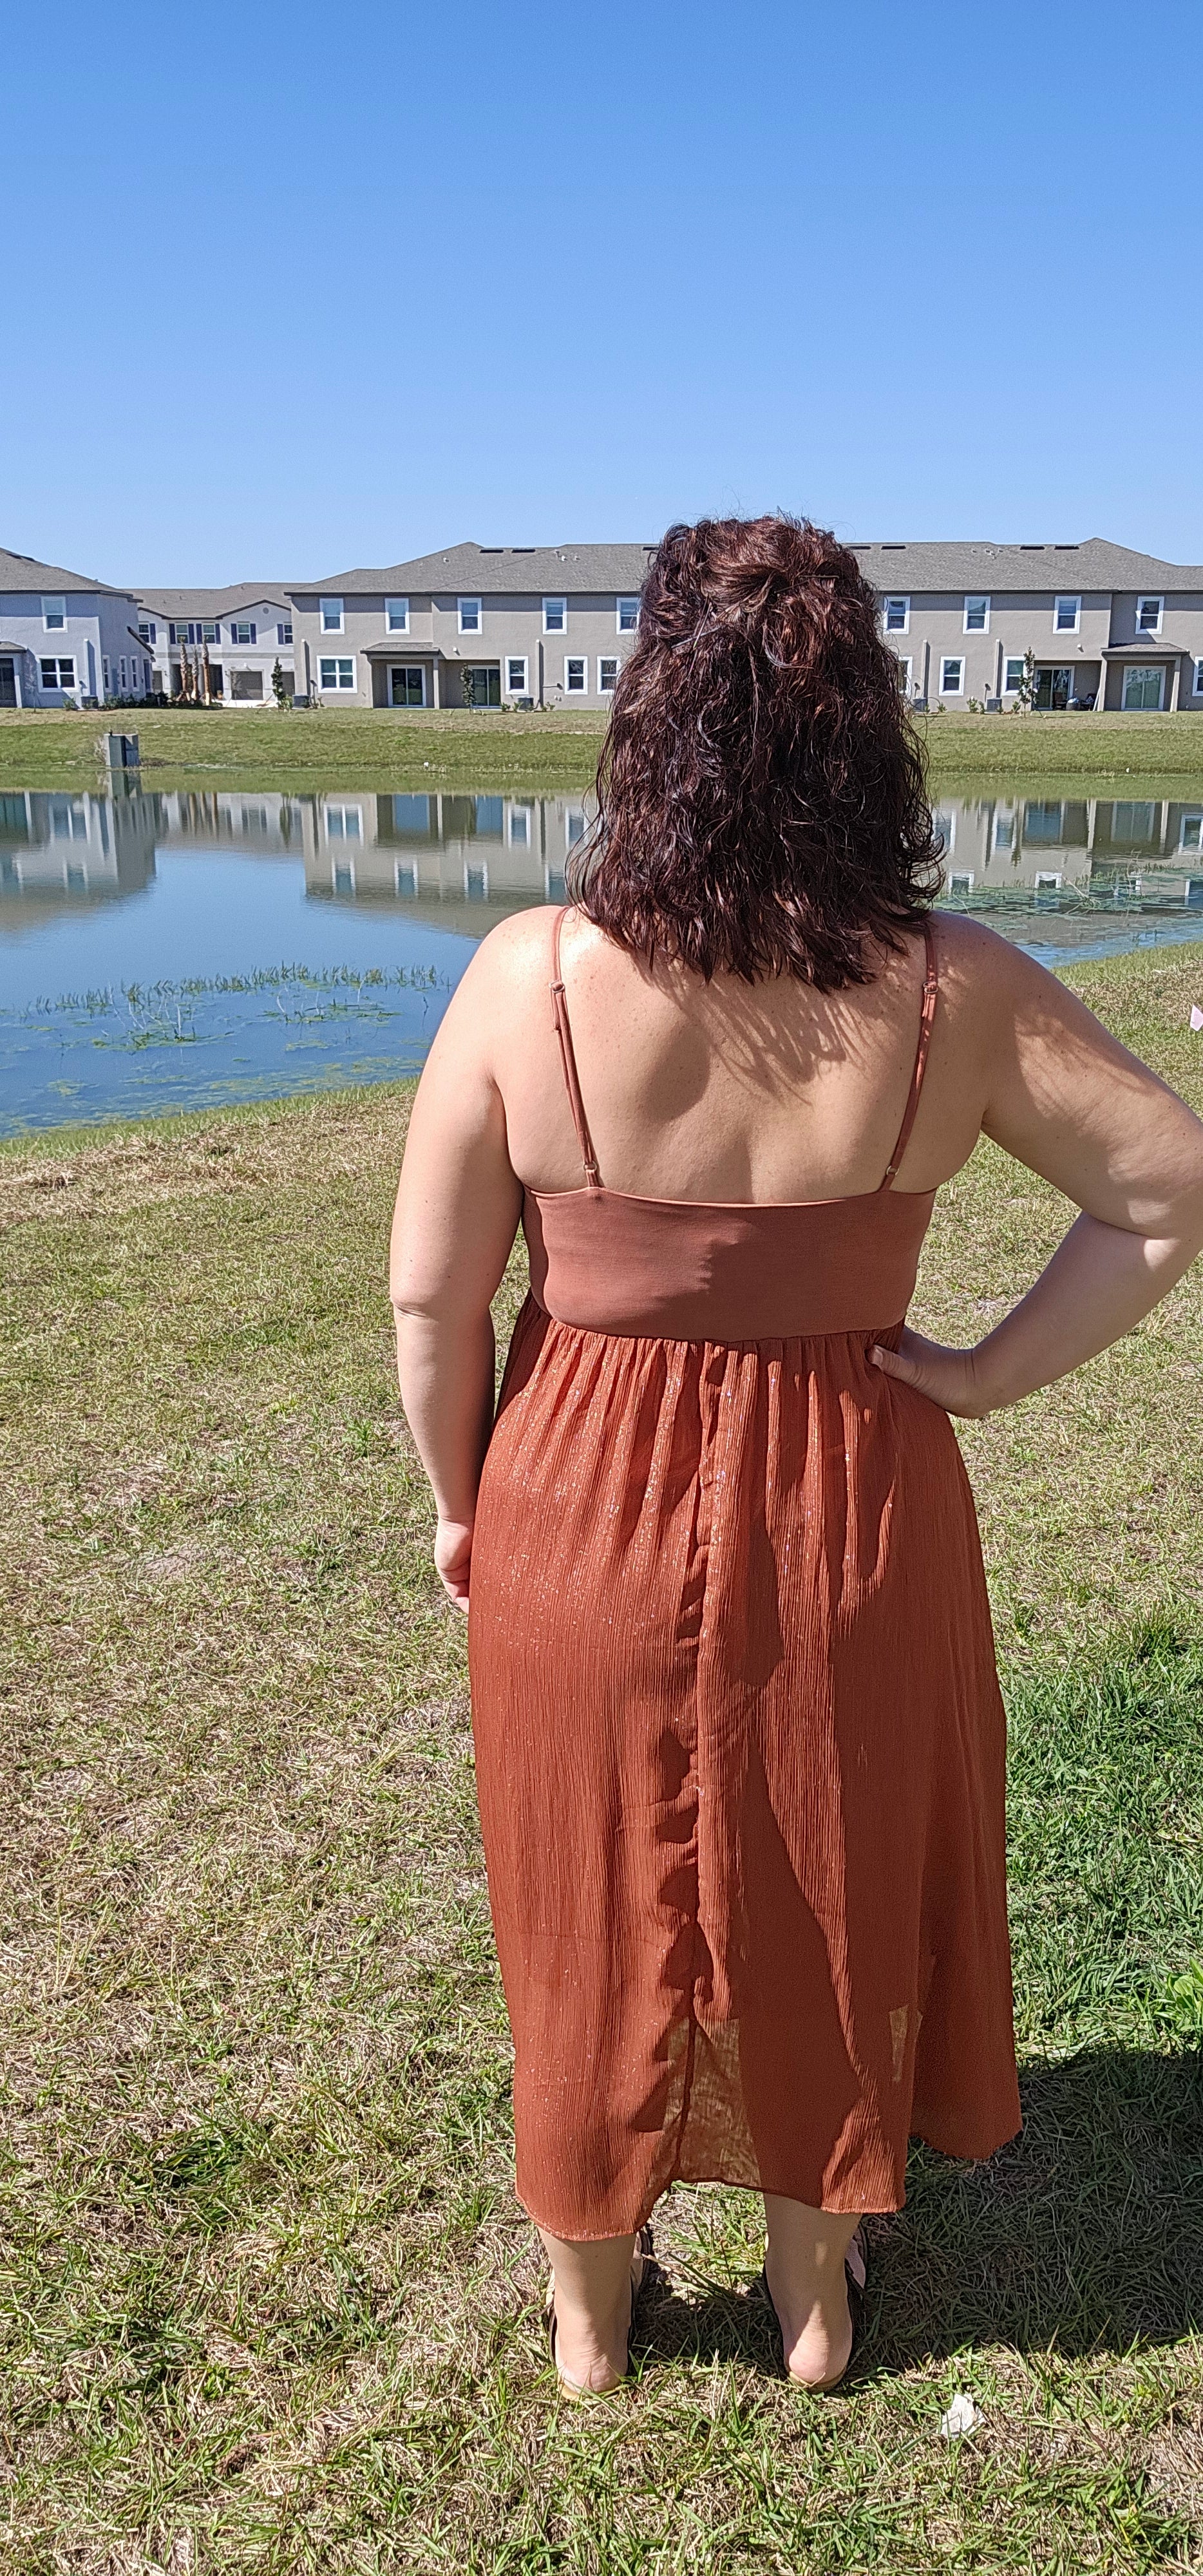 Look stunning and stay comfortable in the "Inaya Rust Modal Cami Midi Dress" with a hint of shimmer! With its adjustable shoulder strap and airy open back, this dress offers the perfect mix of style and breathability. And with a rayon lining, you can strut your stuff in divine comfort and style. You'll want to wear it everywhere! Sizes small through large.